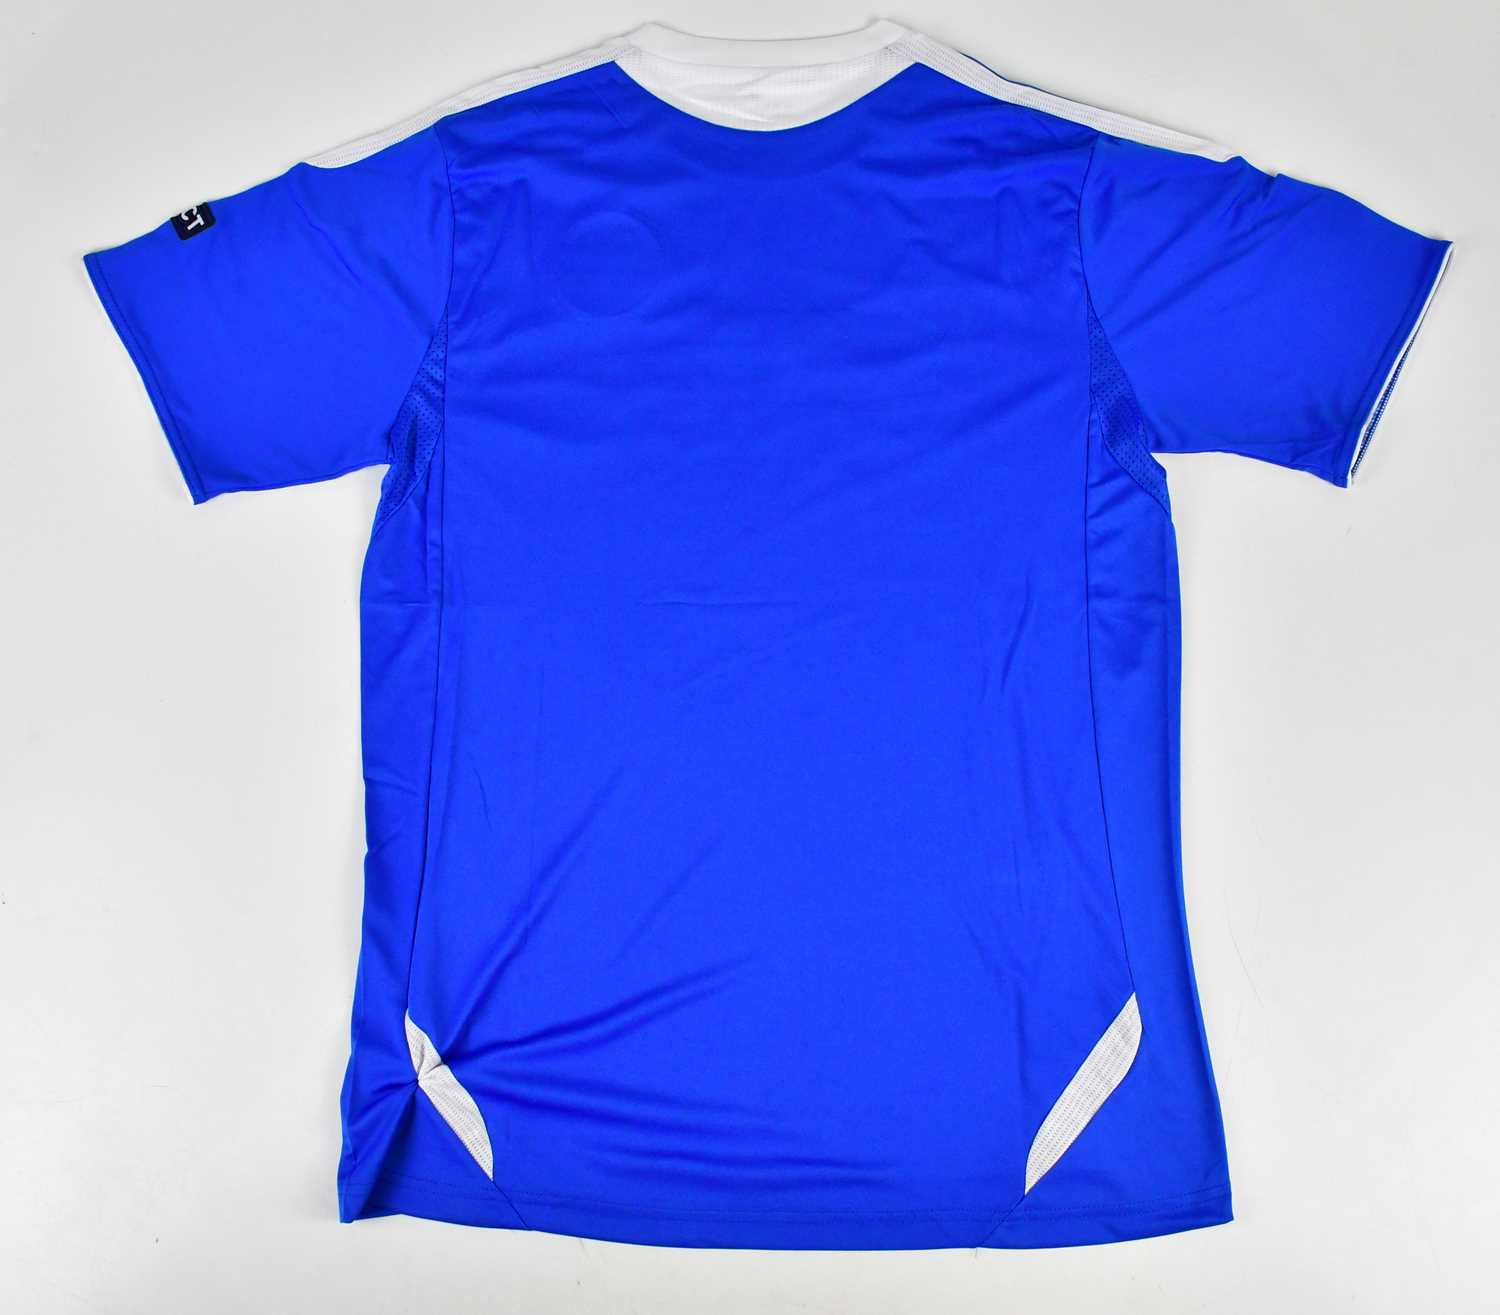 CHELSEA; a 2012 Champions League Winner retro style football shirt, signed by Drogba, Terry and - Image 3 of 3